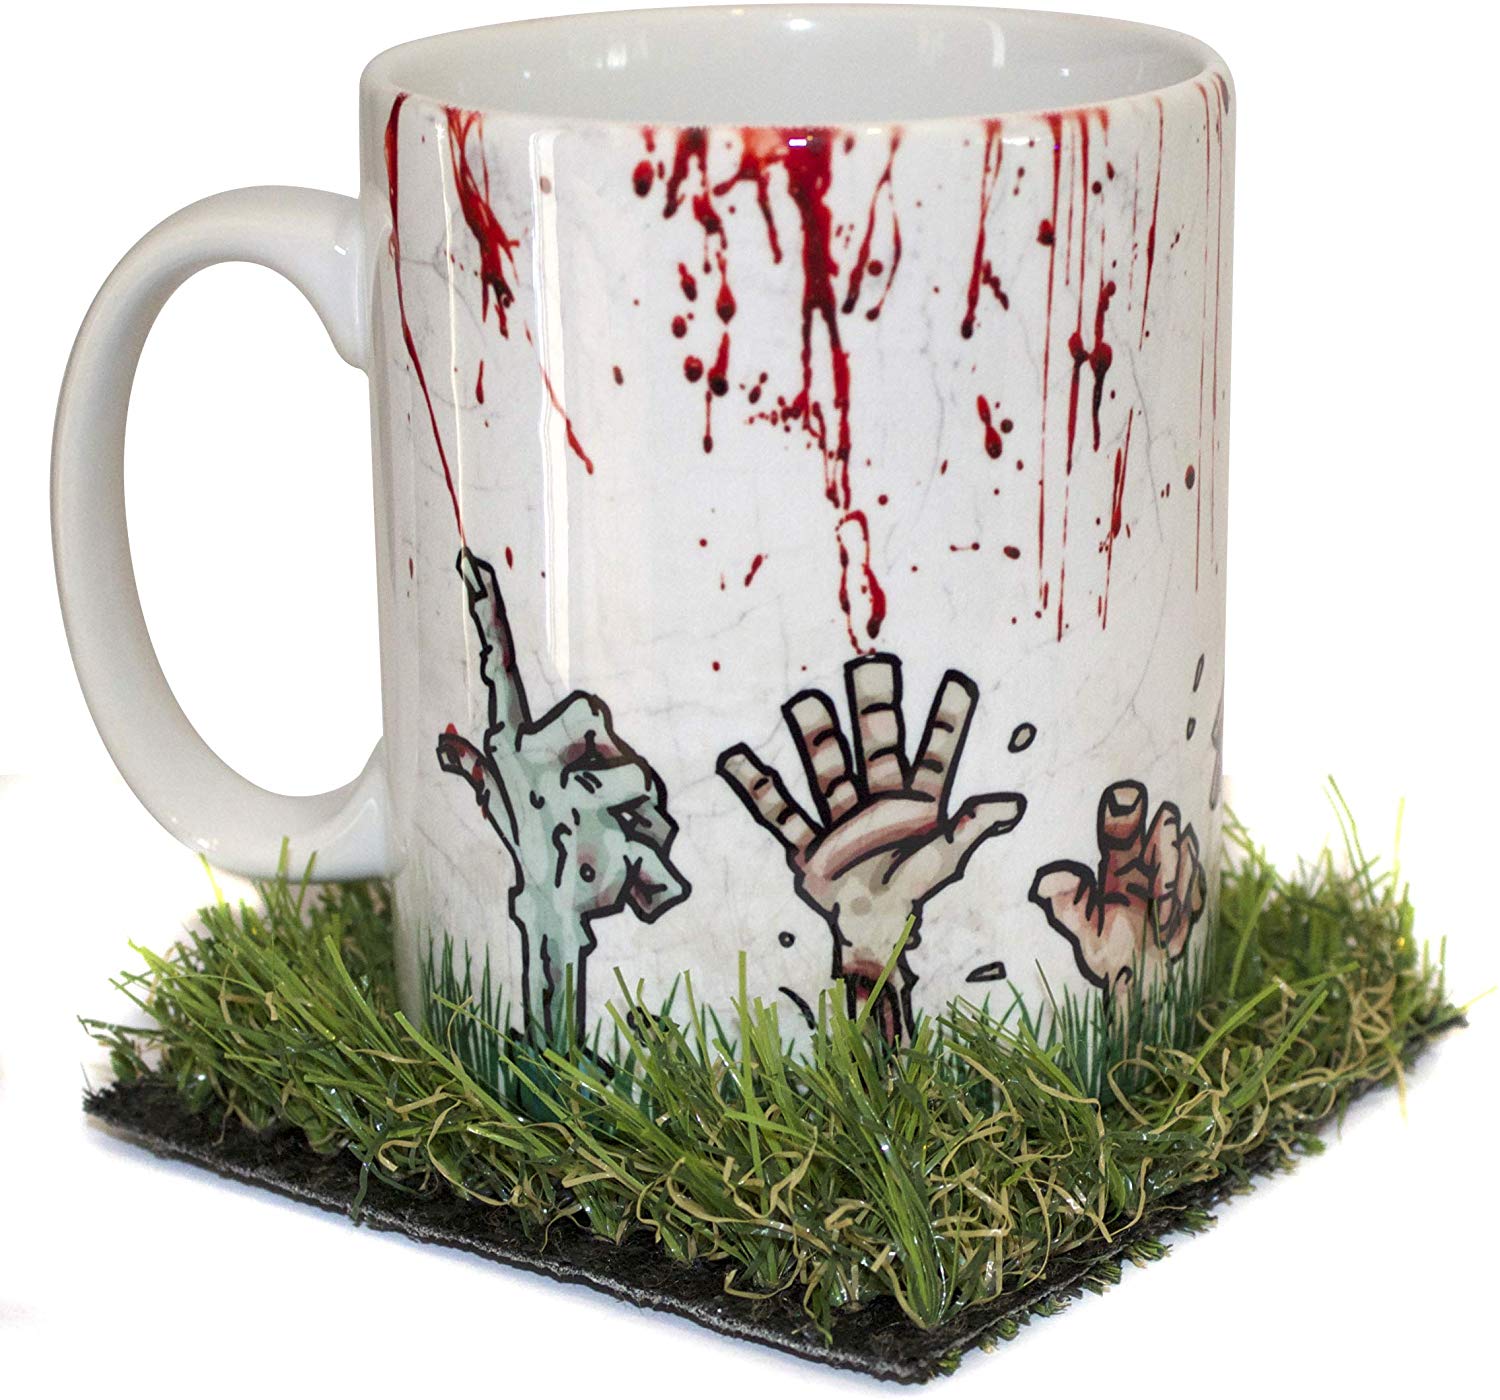 Zombies Rising from the Grave Mug with Grass coaster